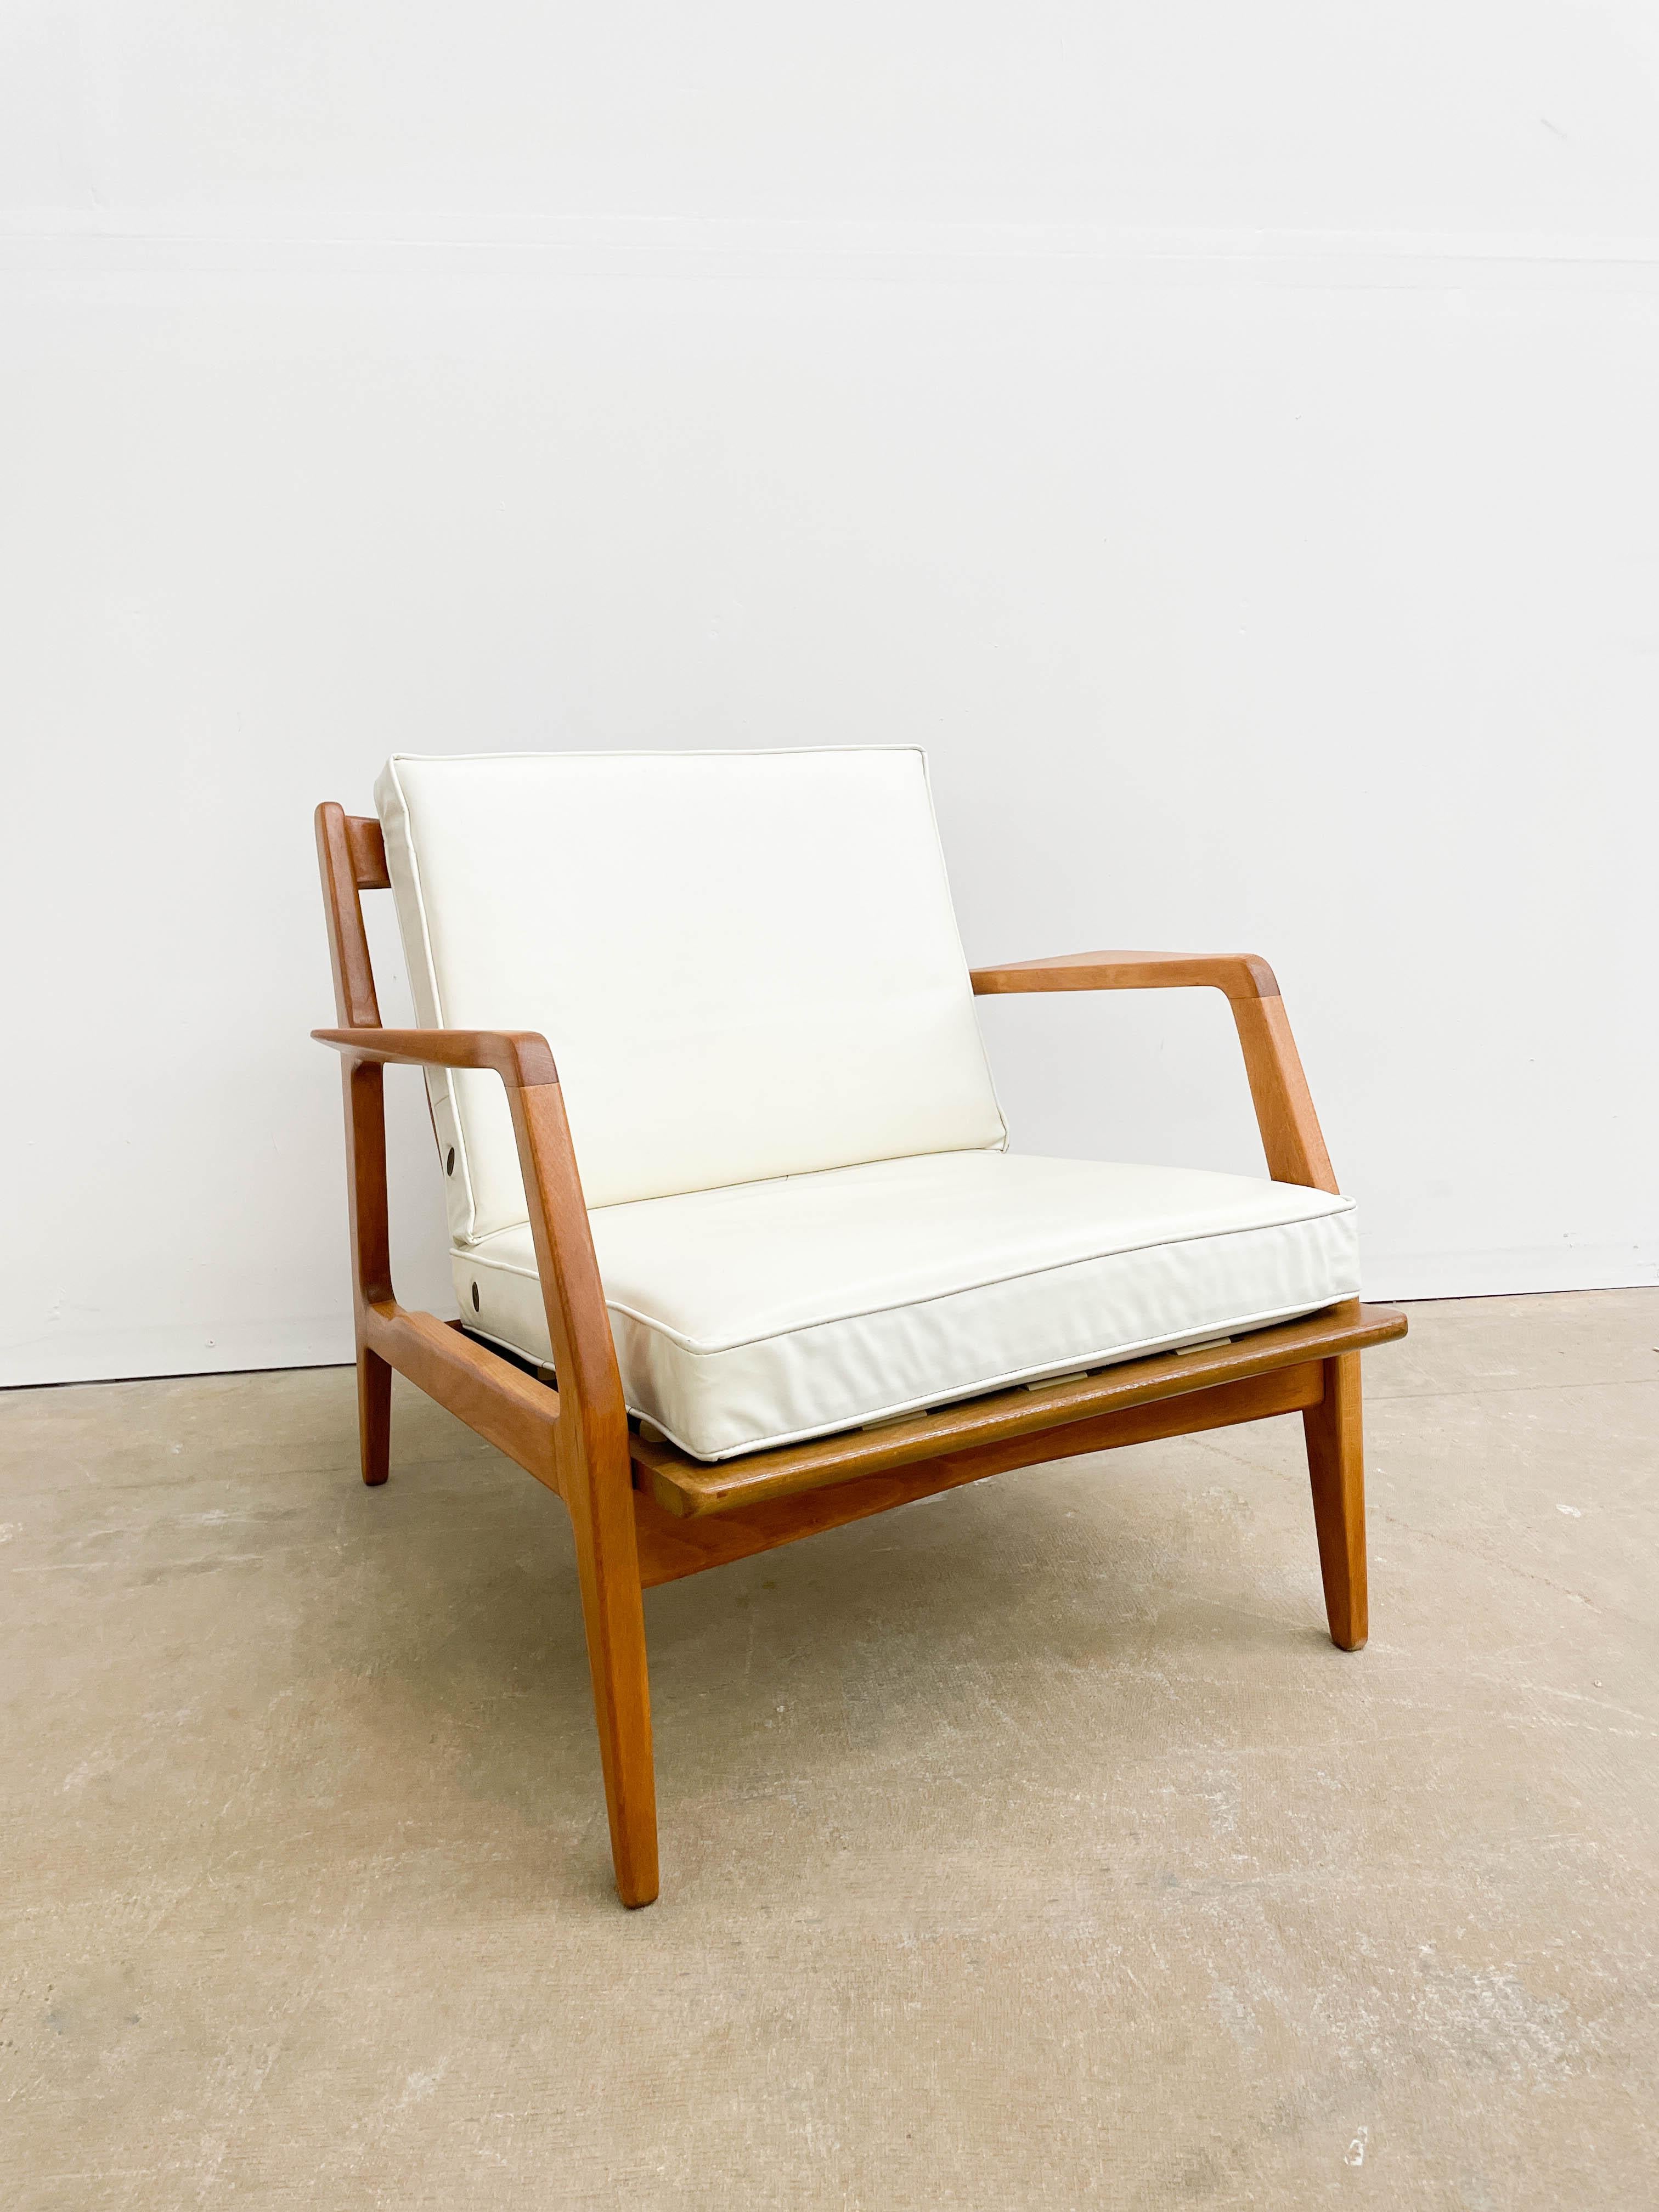 This is an archetypal Danish Modern lounge chair designed by Lawrence Peabody for Selig. Crafted in Denmark in the 1950s, the chair is made from beautiful beech wood. This chair was the most successful design that Lawrence Peabody made for Selig